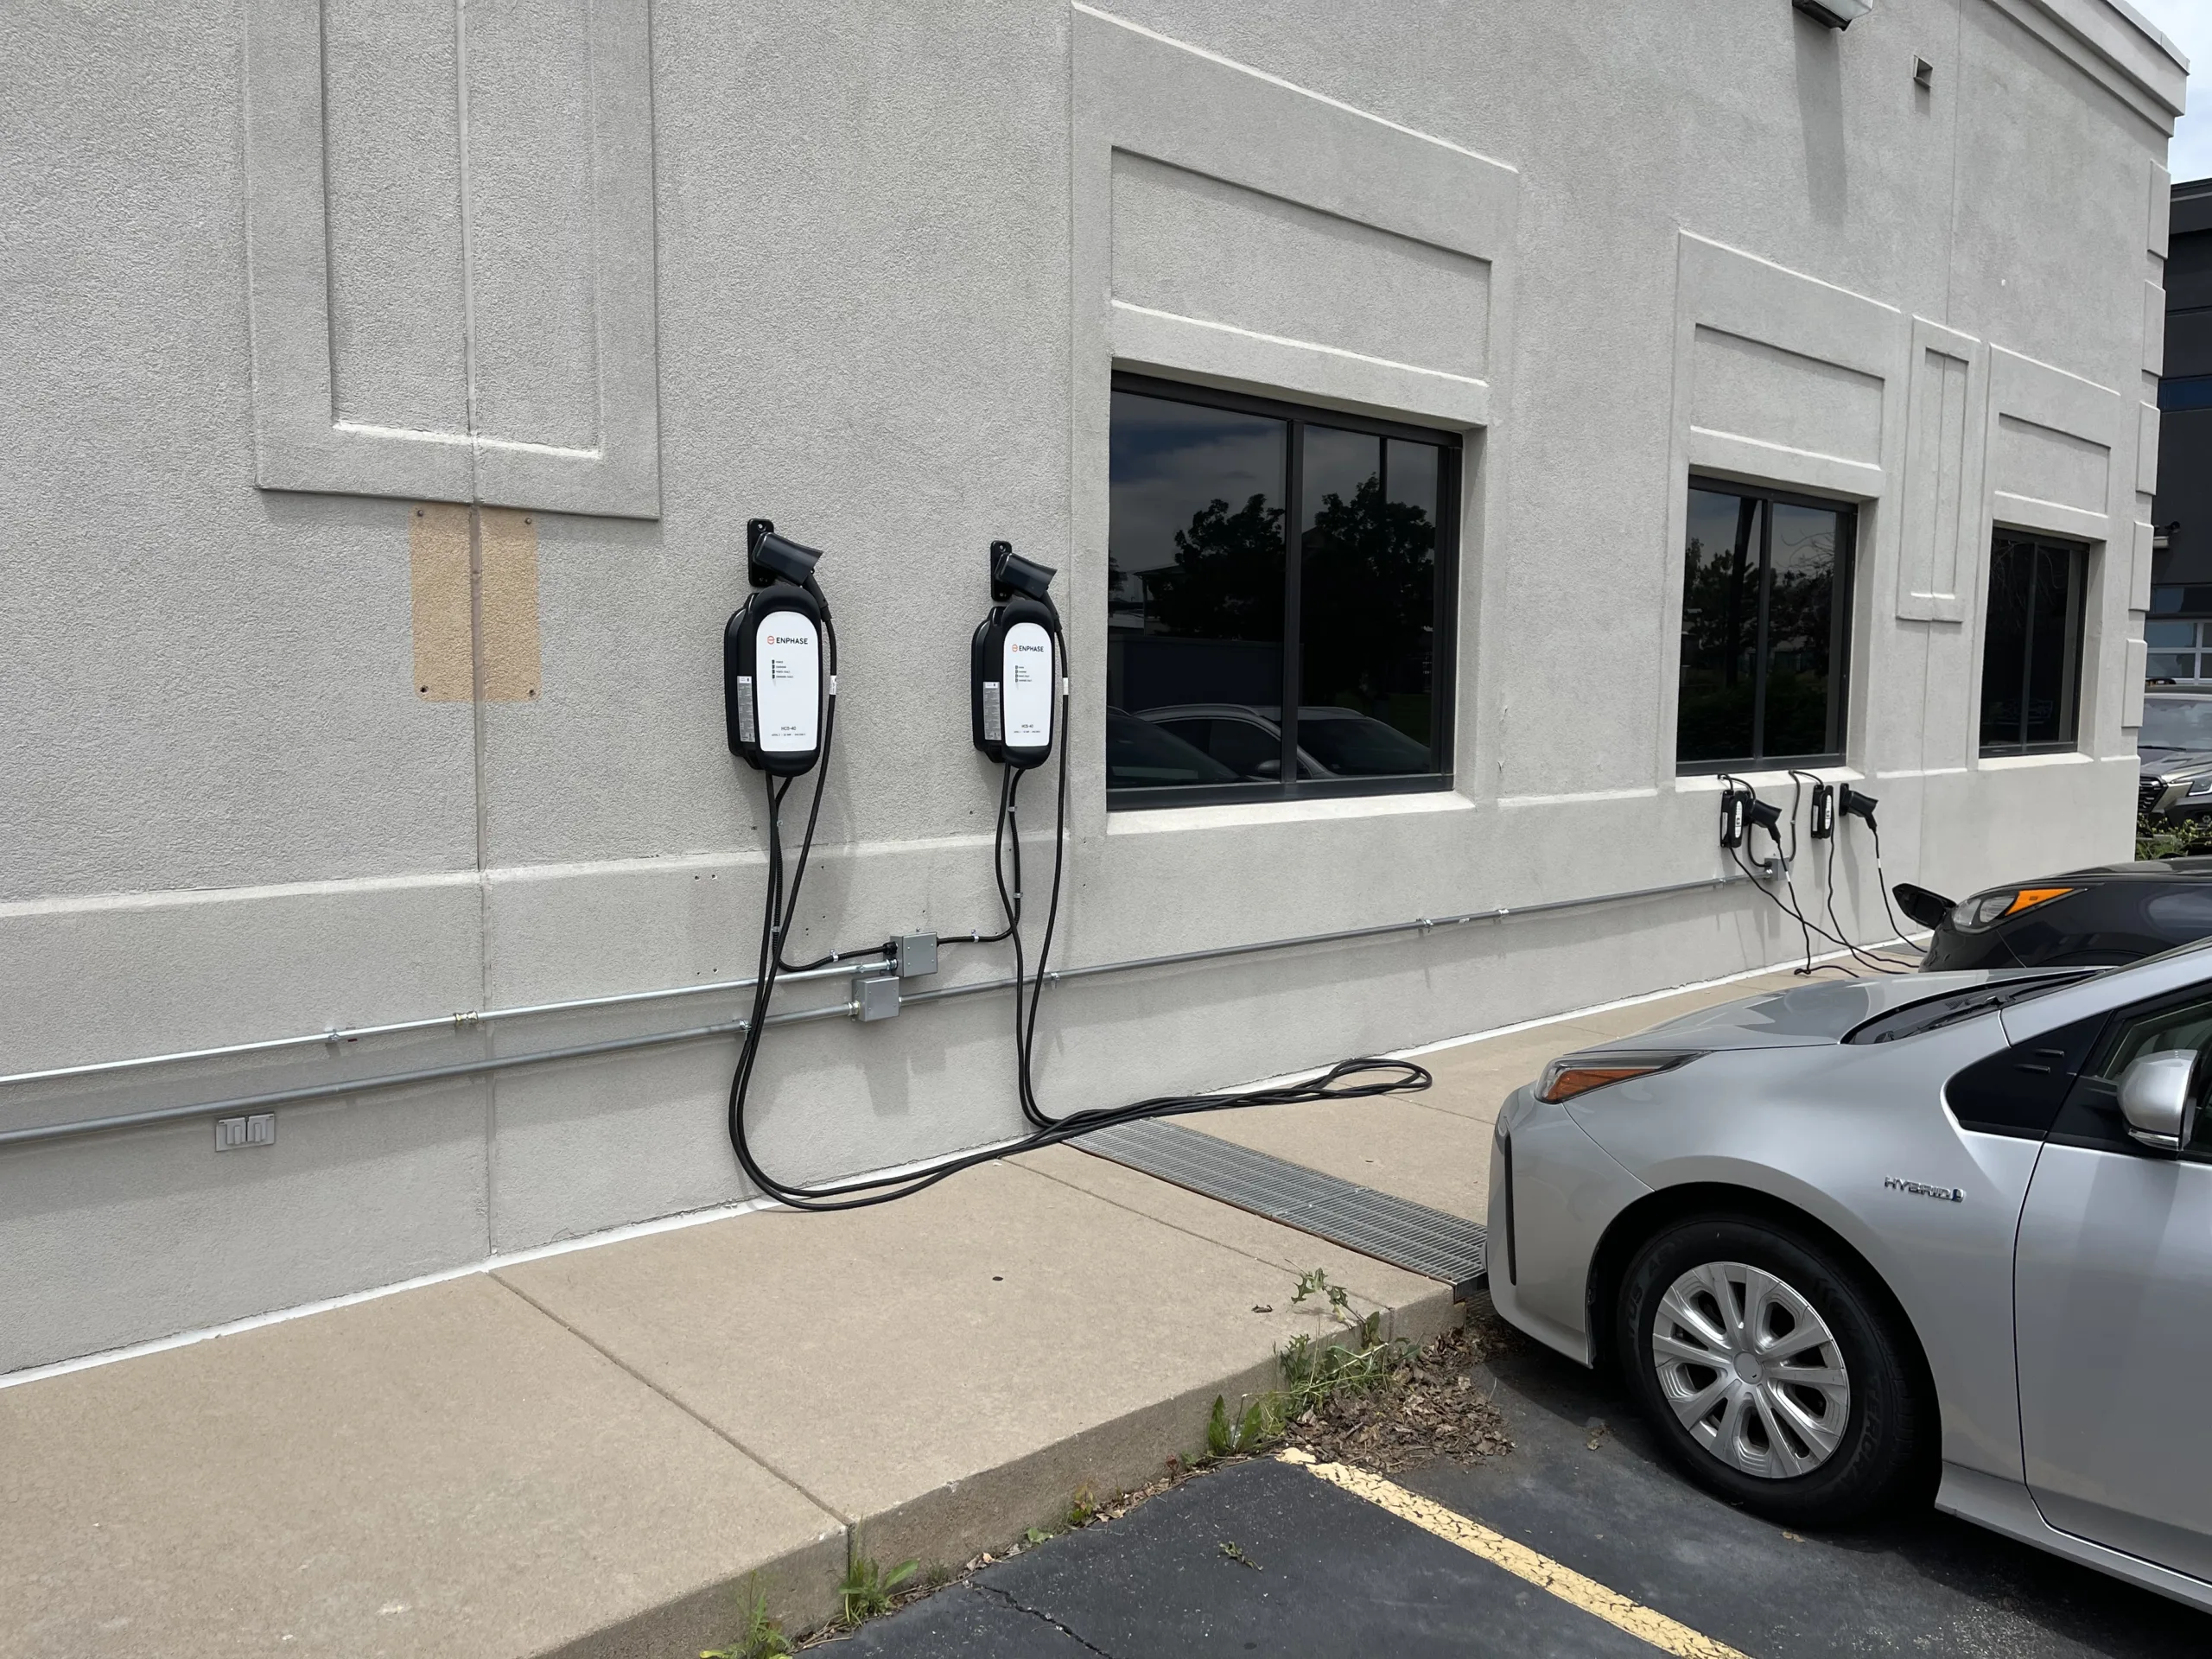 A depiction of two cars parked by an electric charging station in front of a building, illustrating our electrician contractor services for installation and repairs